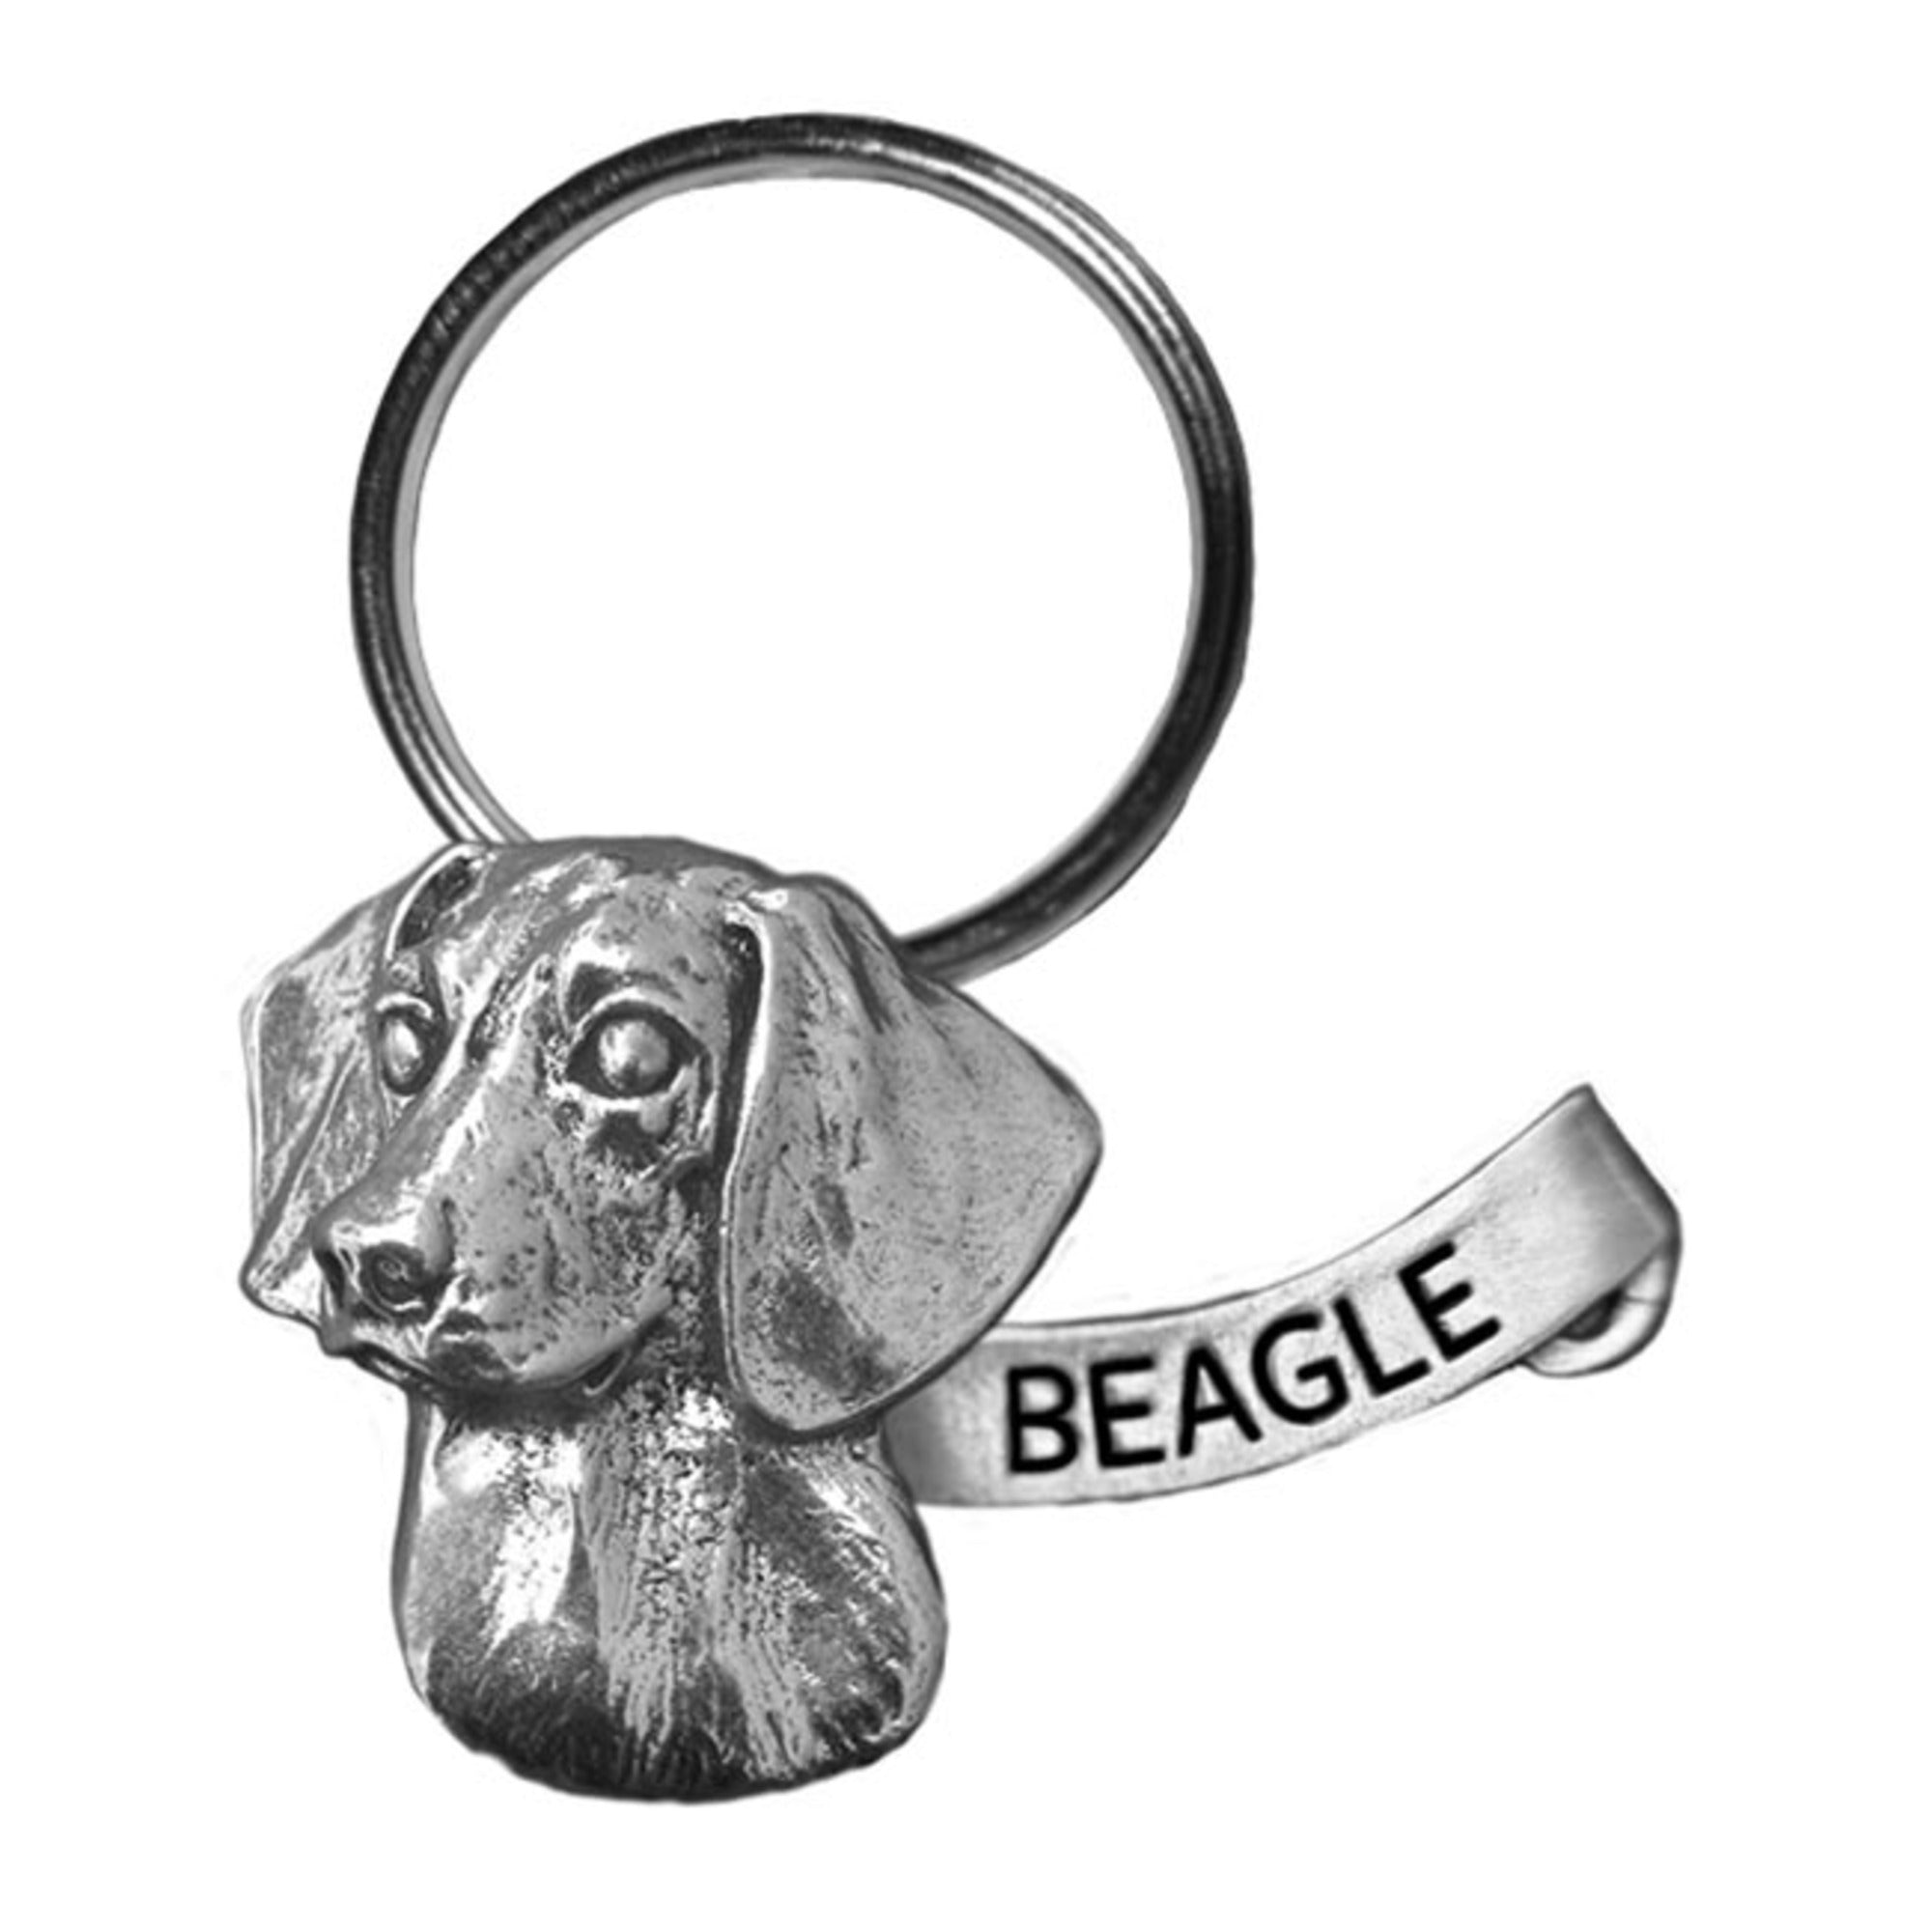 New-Spin Metal Casting Beagle Keychain